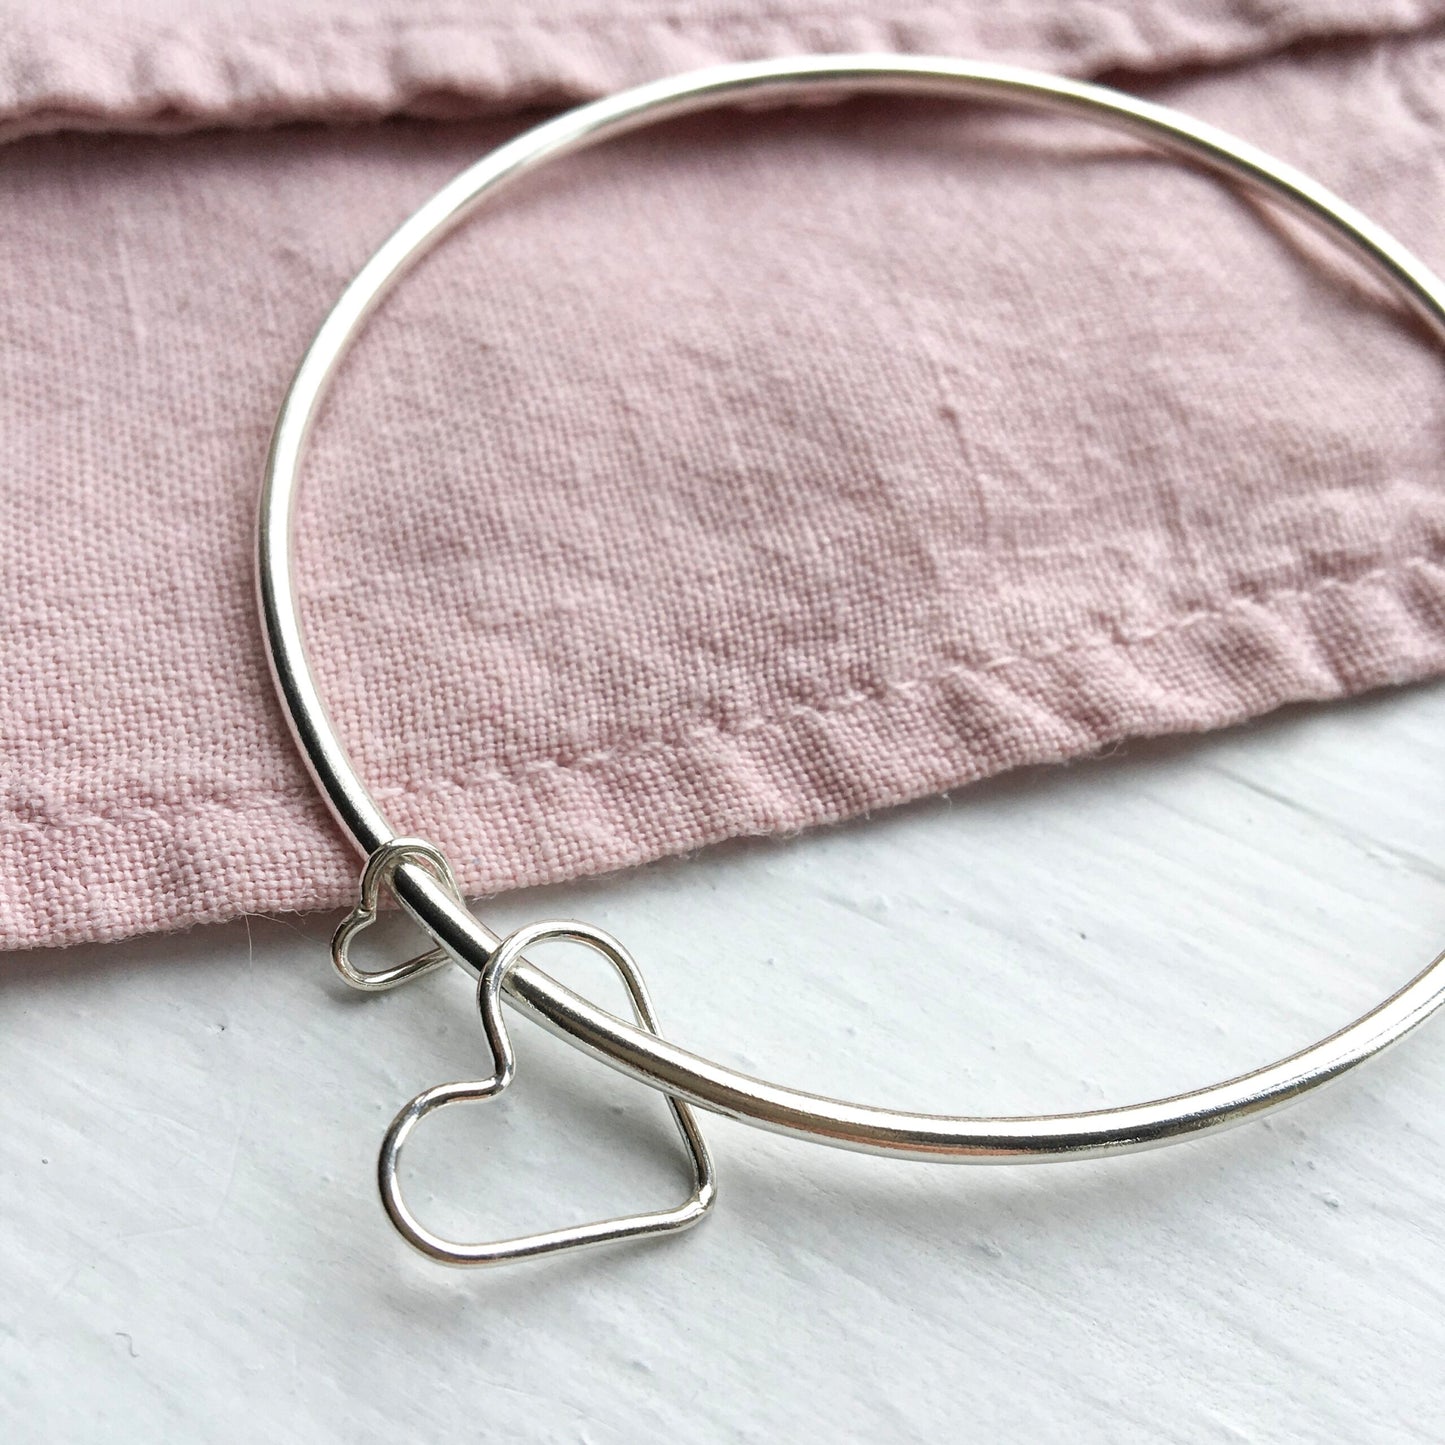 'You and Me' Heart Bangle - Sterling Silver Bracelet